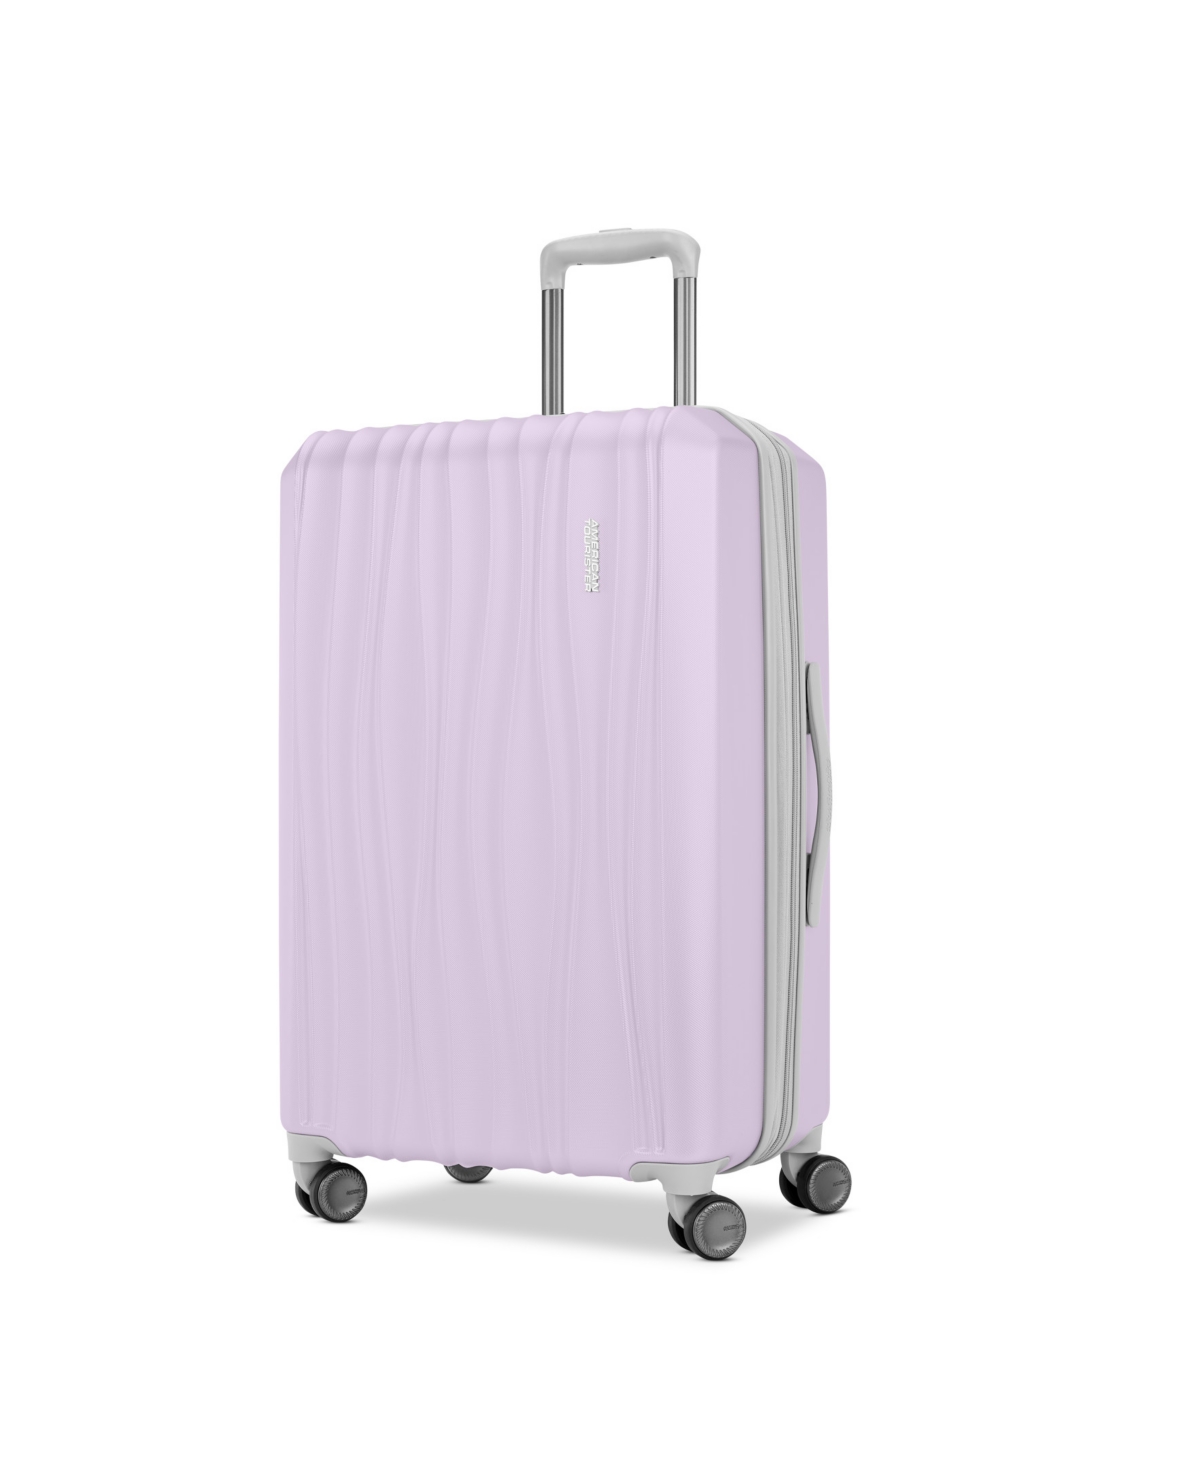 American Tourister Tribute Encore Hardside Check-in 24" Spinner Luggage In Icy Lilac